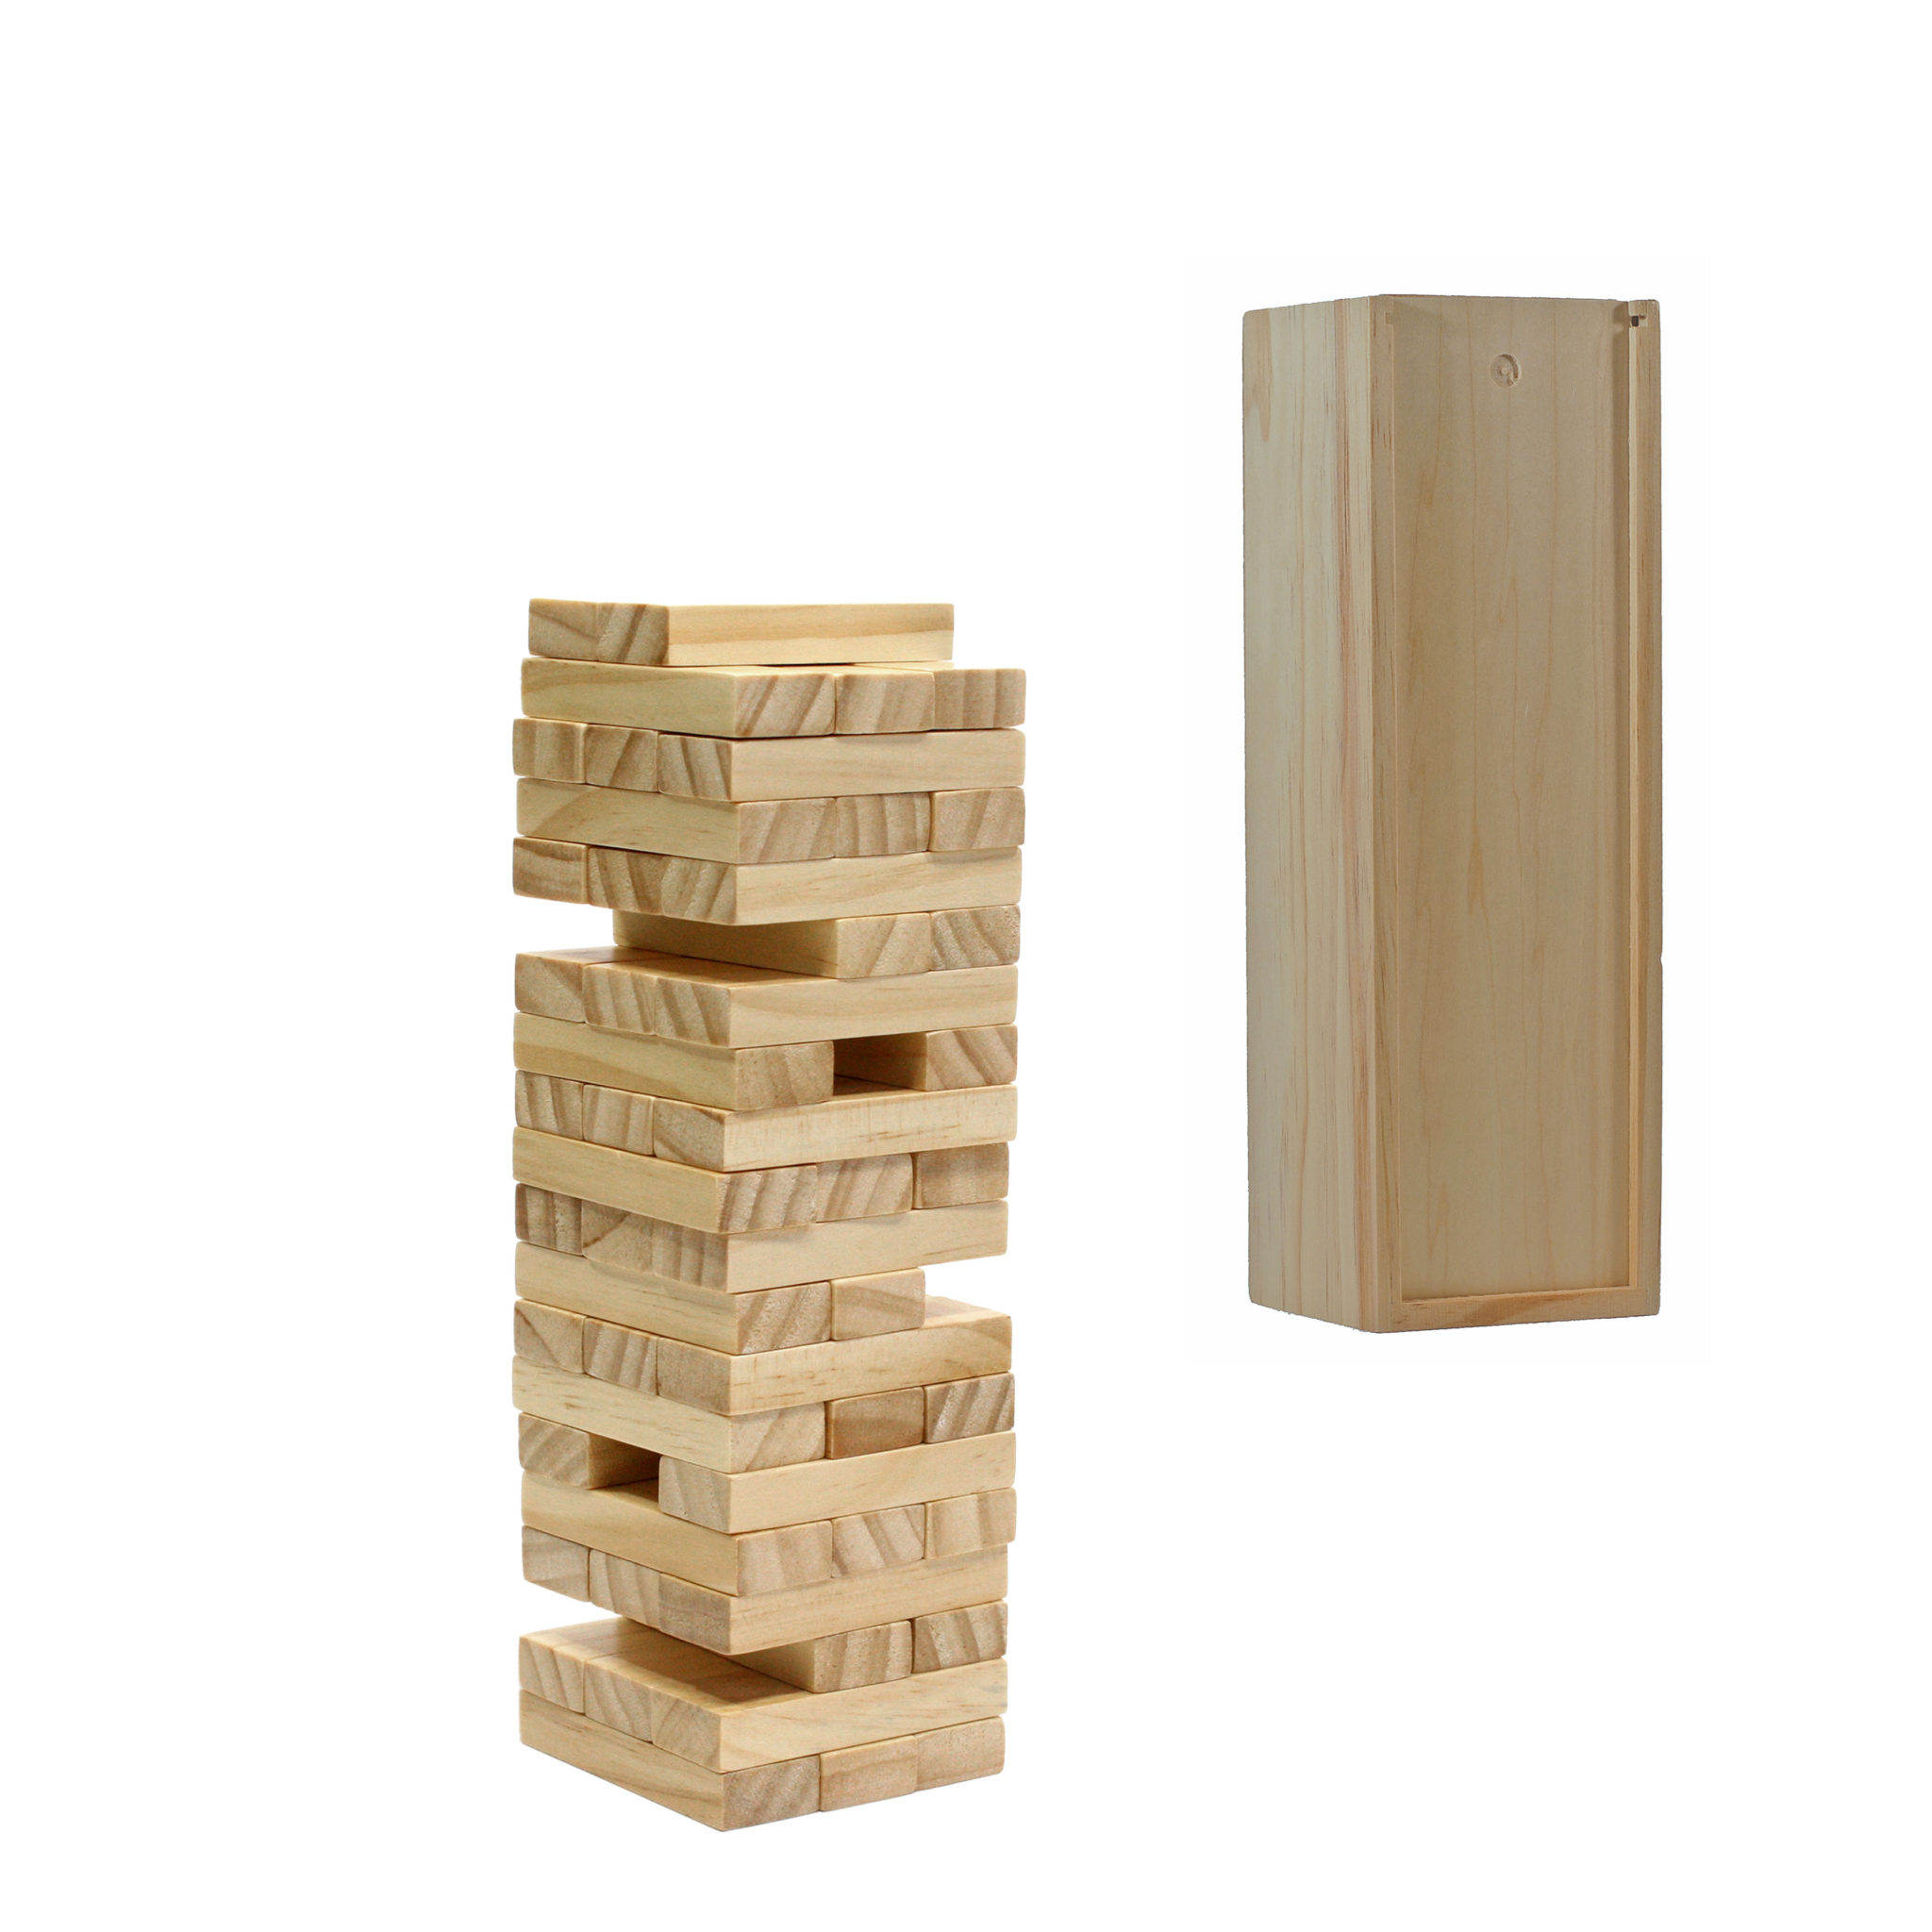 Age Play Numbers Understanding Shapes Stacking Boxes Tower 66cm Game Wood 12 